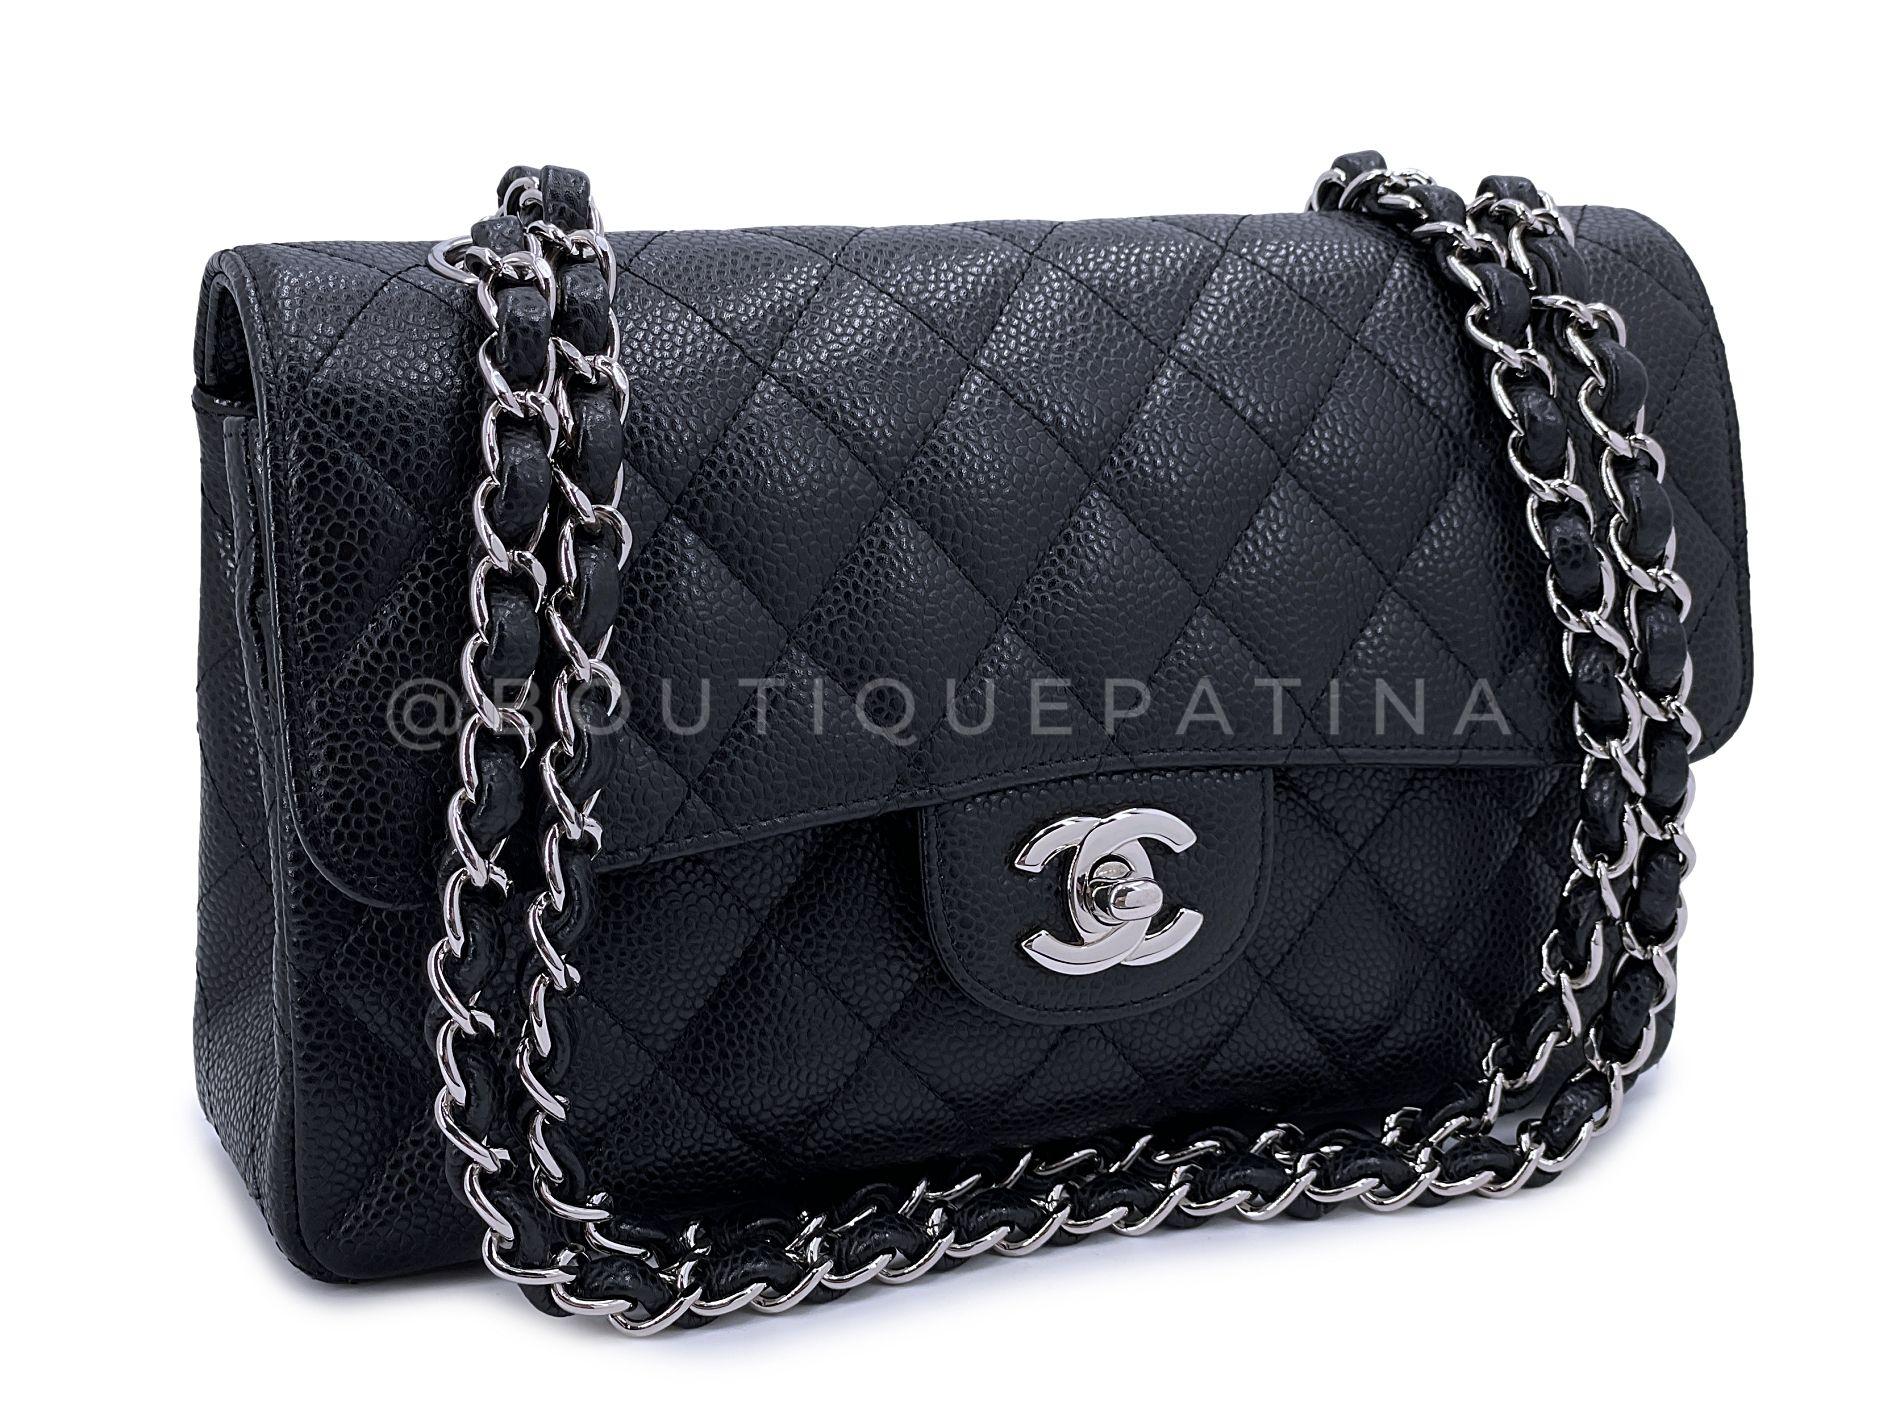 Store item: 67981
The iconic holy grail bag is the Chanel Classic Flap. Coveted for its simplicity and elegance - woven chain double strap that can be worn short or long, turnlock CC clasp, lambskin interior.
With a double flap, or another flap on